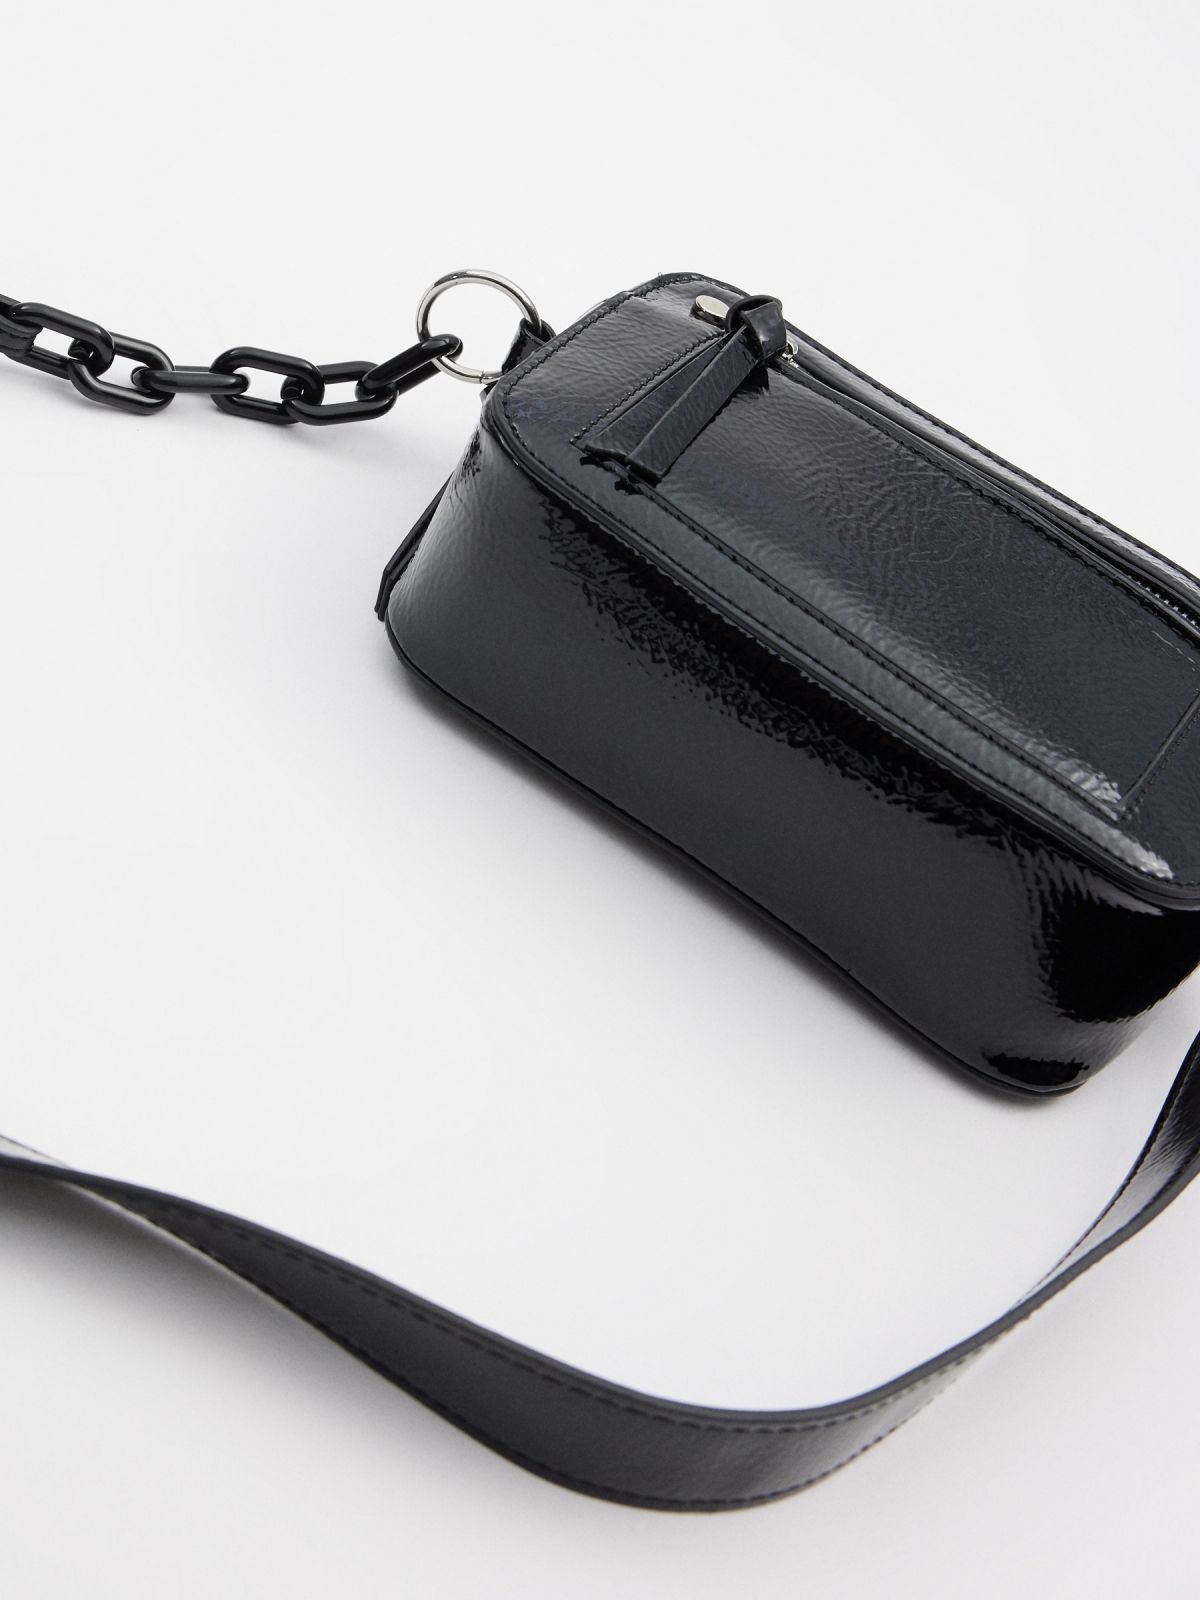 Patent leather effect crossbody bag black detail view